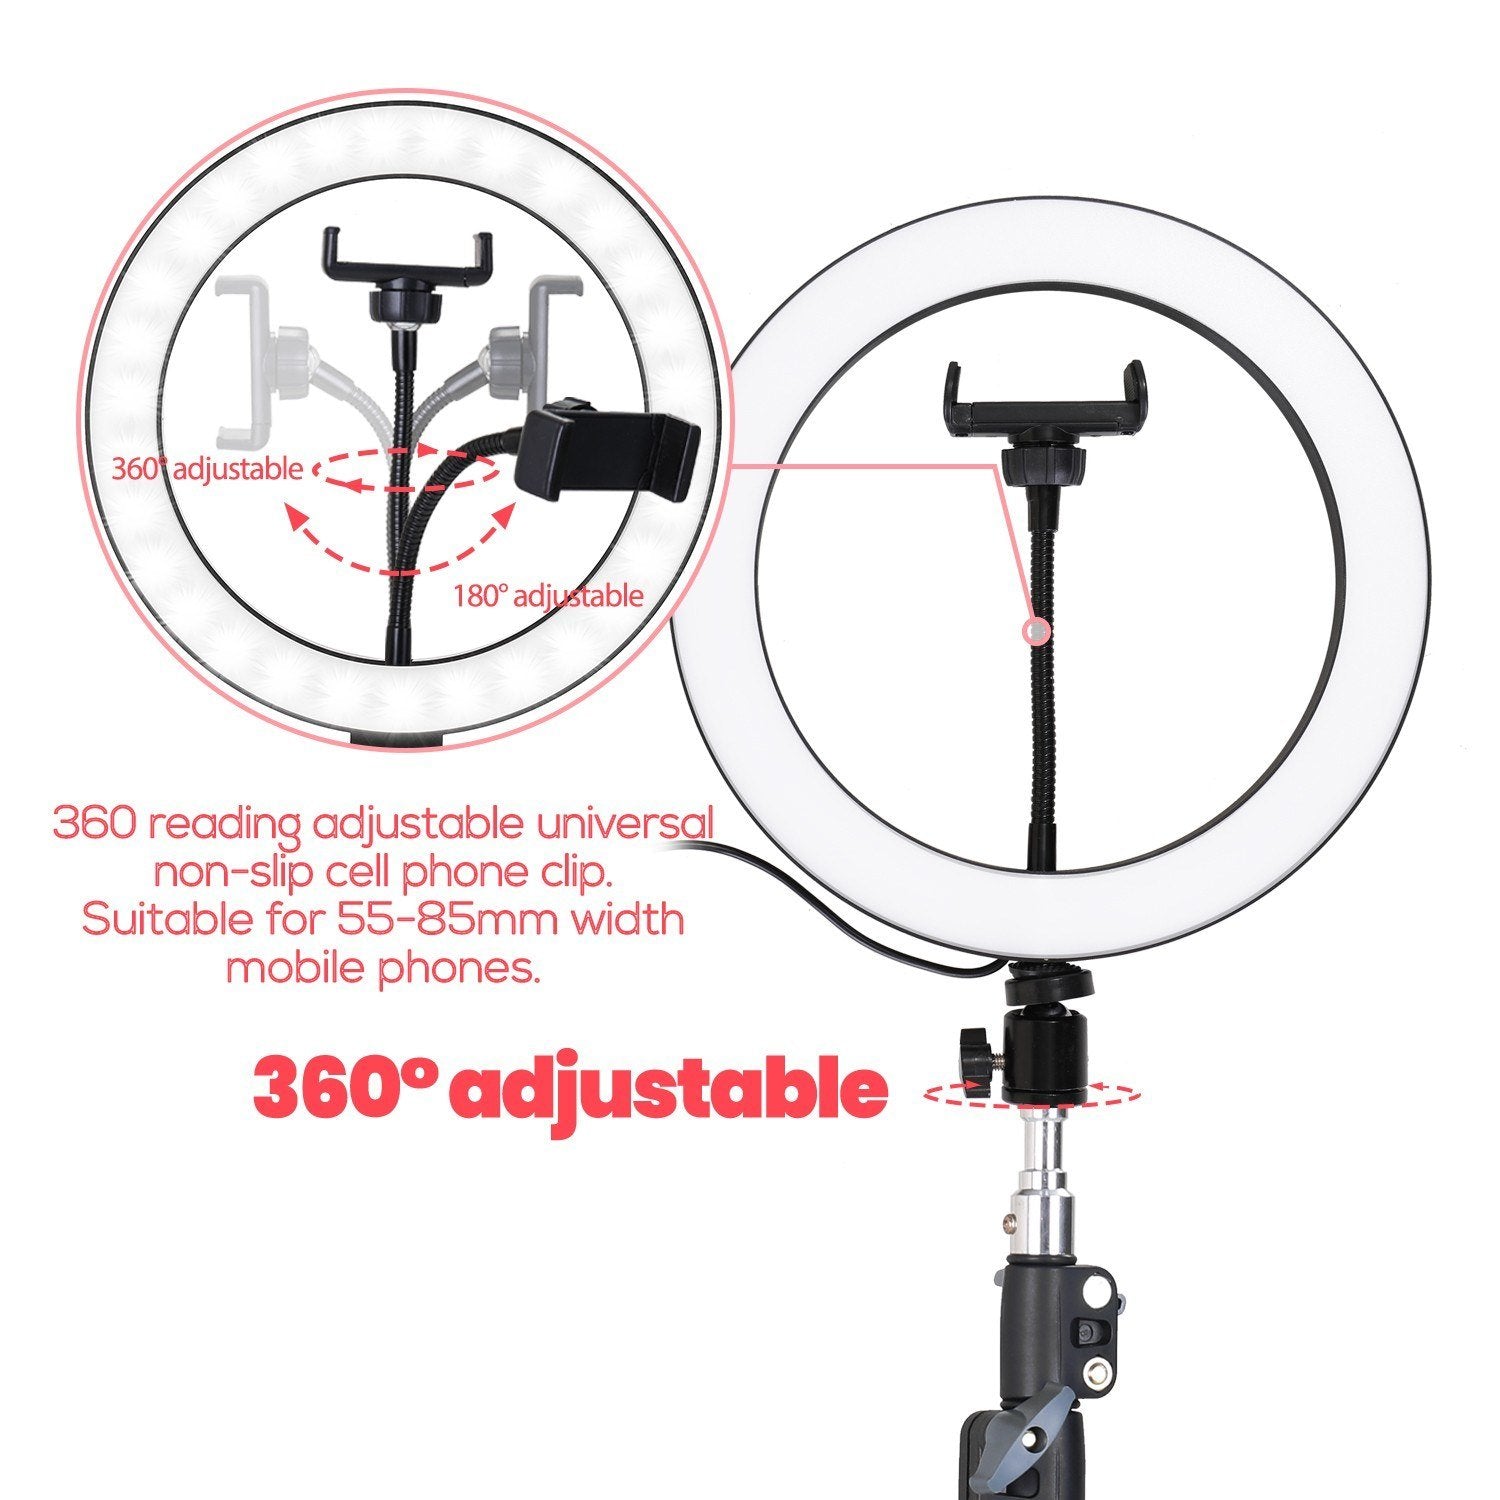 Alloy Photography LED Selfie Ring Light Dimmable Photo Camera Phone Lamp with 1.6M Stand Tripod